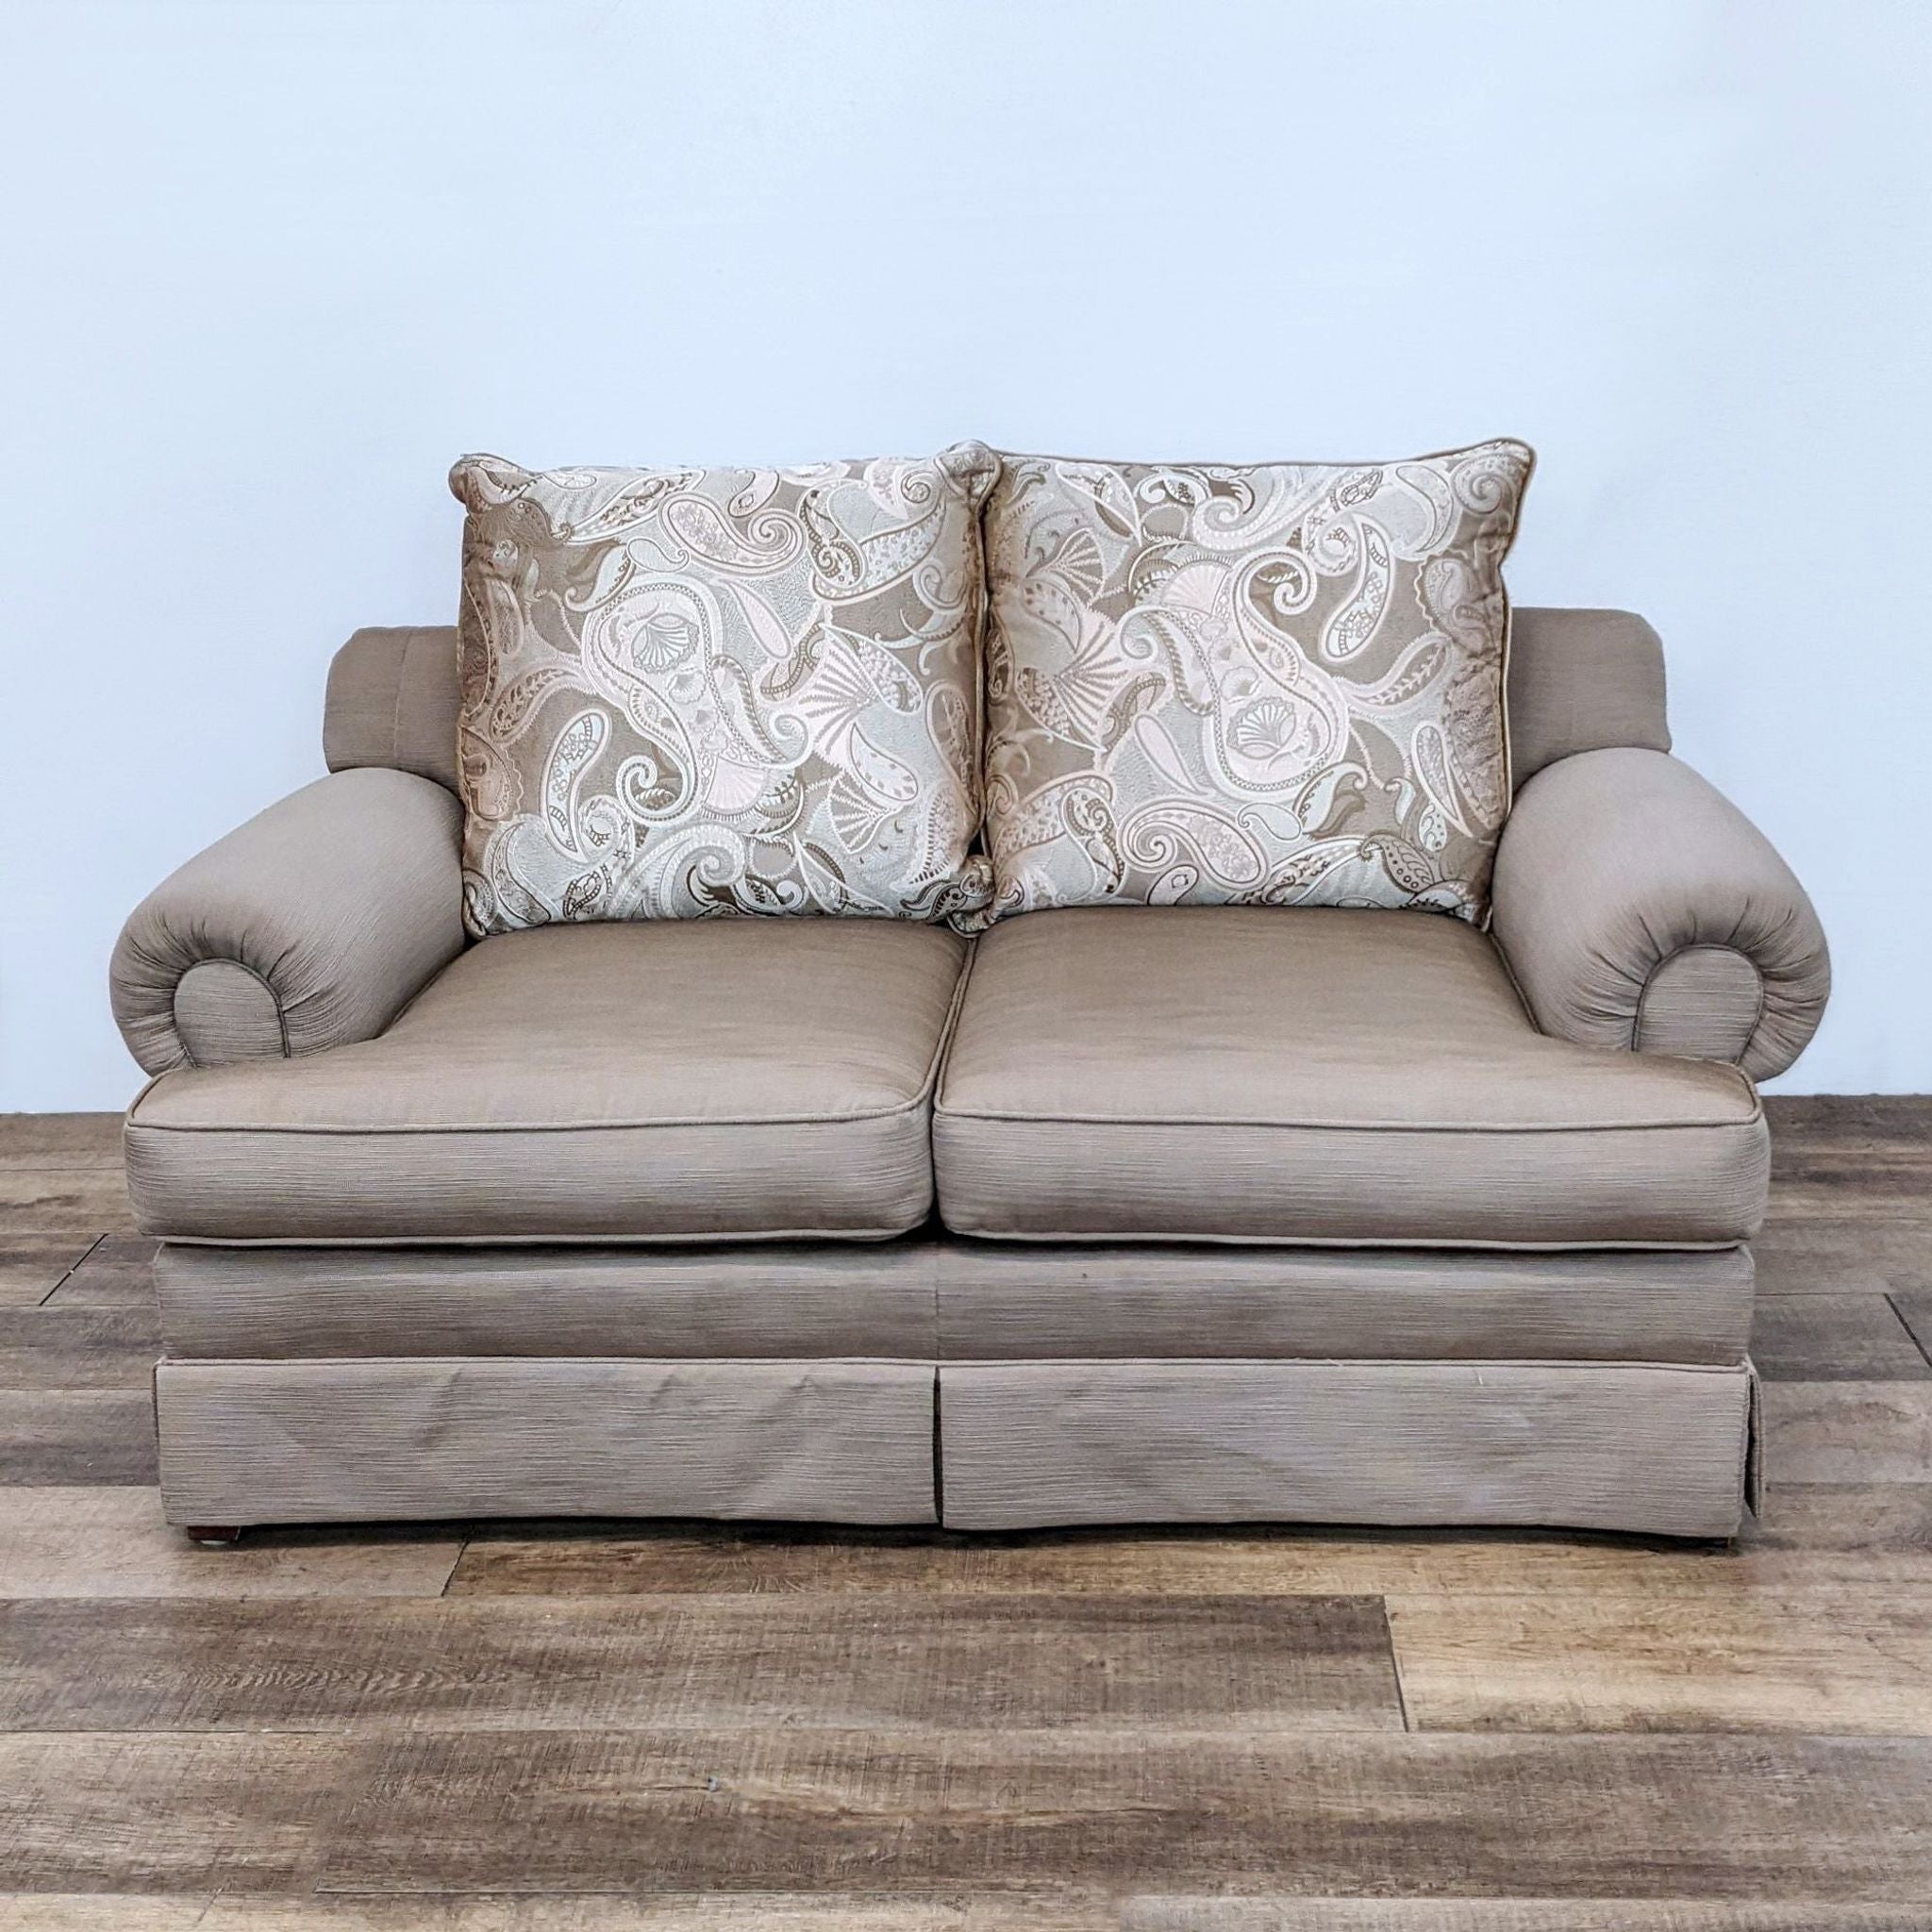 Reperch brand Loveseat in neutral color with roll arms and patterned cushions on a herringbone wood flooring.